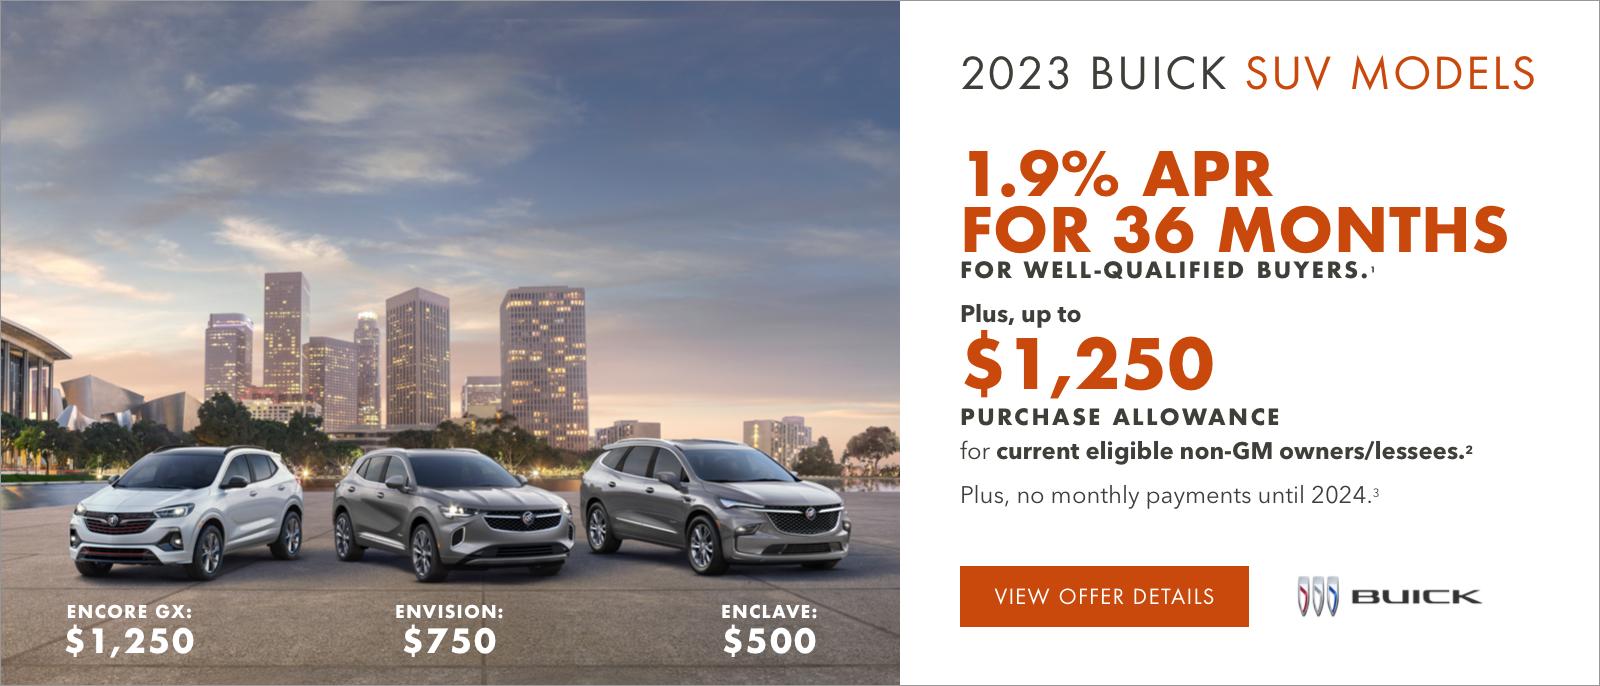 1.9% APR FOR 36 MONTHS FOR WELL-QUALIFIED BUYERS.1

Plus, up to $1,250 PURCHASE ALLOWANCE for current eligible non-GM owners/lessees.2

PLUS, NO MONTHLY PAYMENTS UNTIL 2024.3